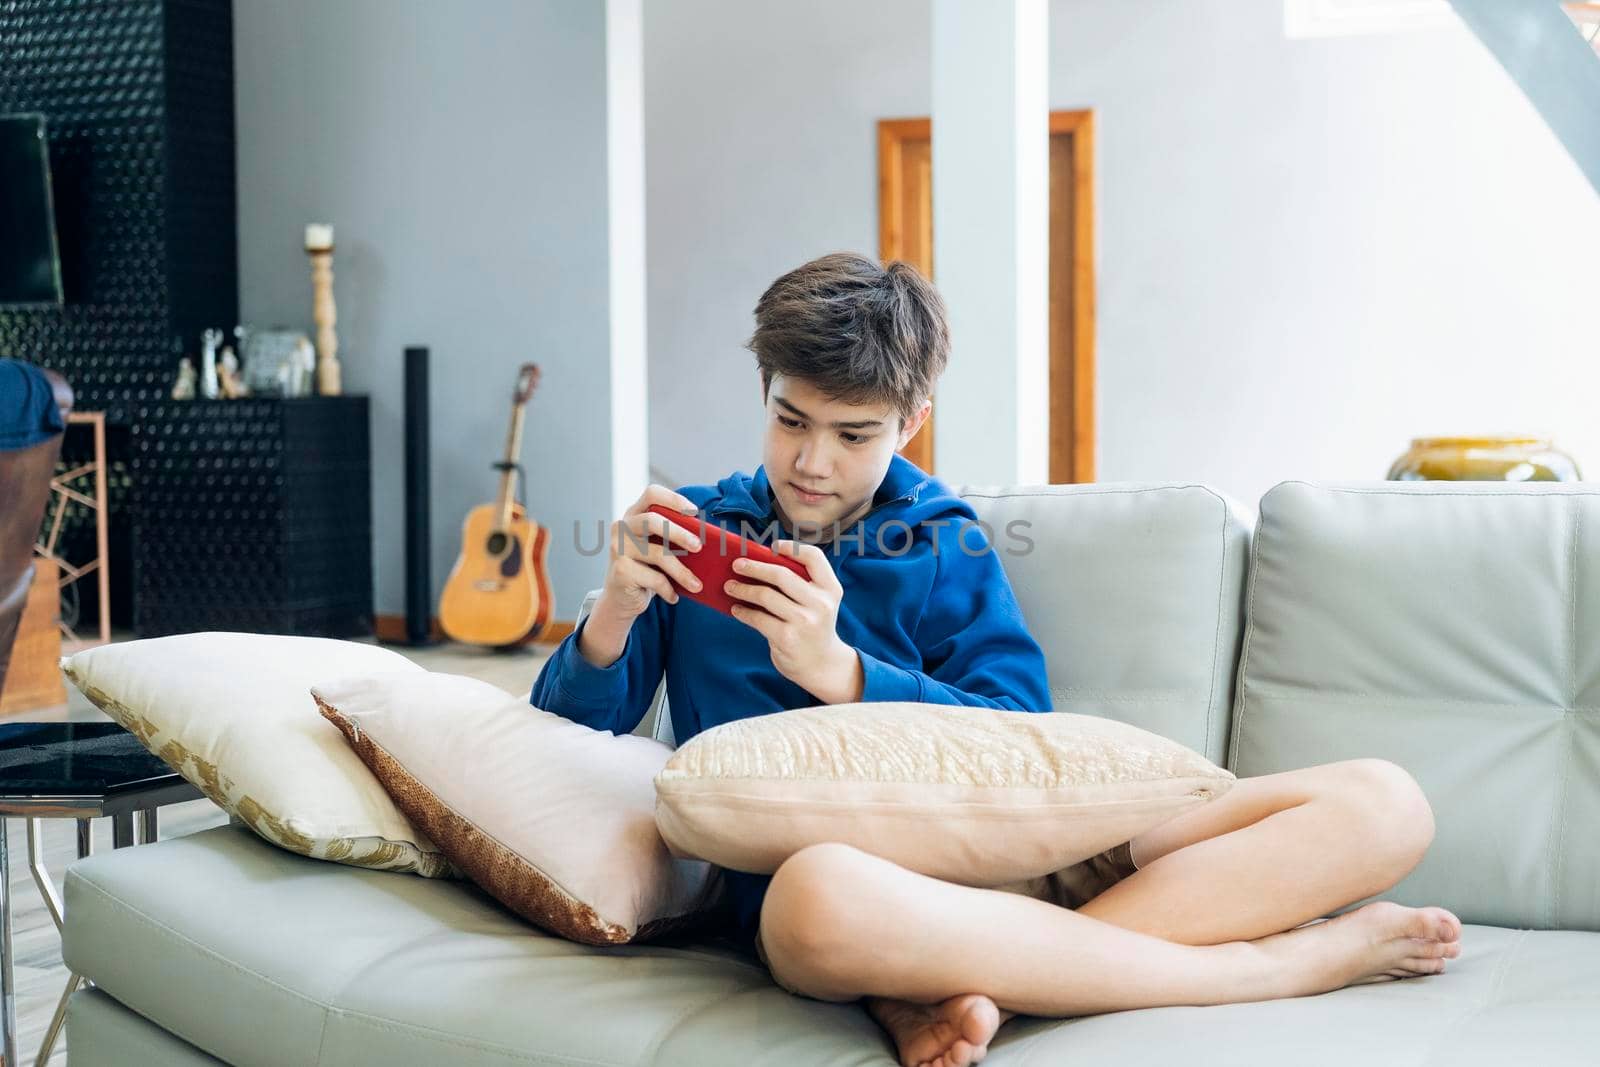 The boy playing online game on smartphone at home by ijeab